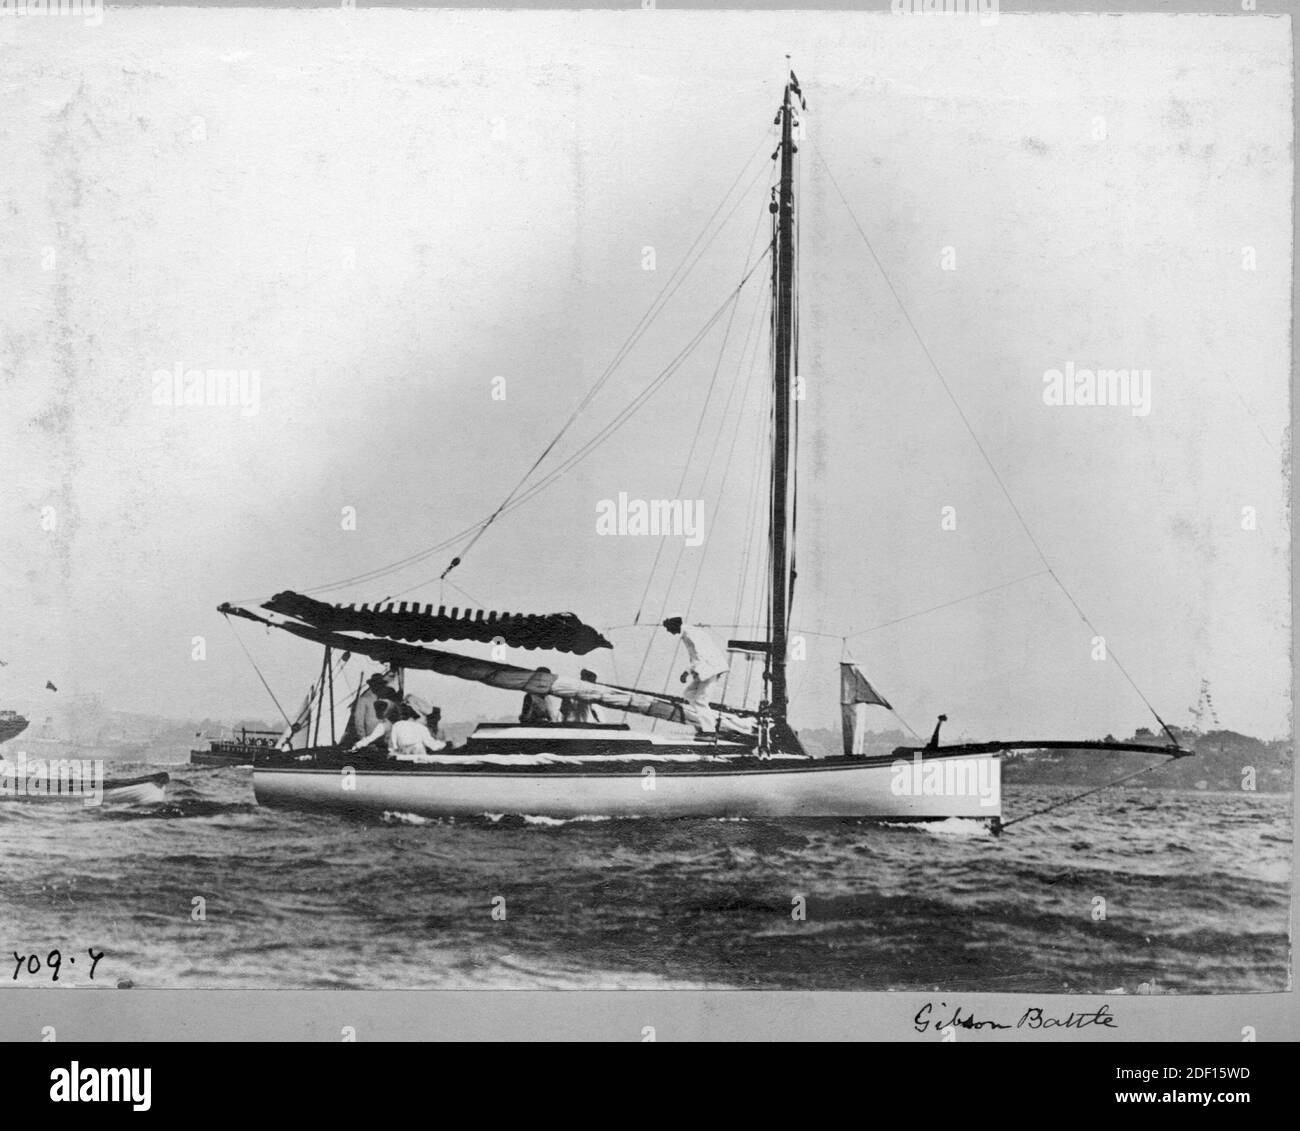 AJAXNETPHOTO. 1908 (APPROX). SOUTHAMPTON, ENGLAND. - EARLY THORNYCROFT YACHT - JOHN THORNYCROFT DESIGNED AND BUILT GAFF CUTTER GIBSON BATTLE; EARLY 20TH CENTURY. PHOTO:VT COLLECTION/AJAXNETPHOTO REF:AVL VTCOLL 709 7 Stock Photo